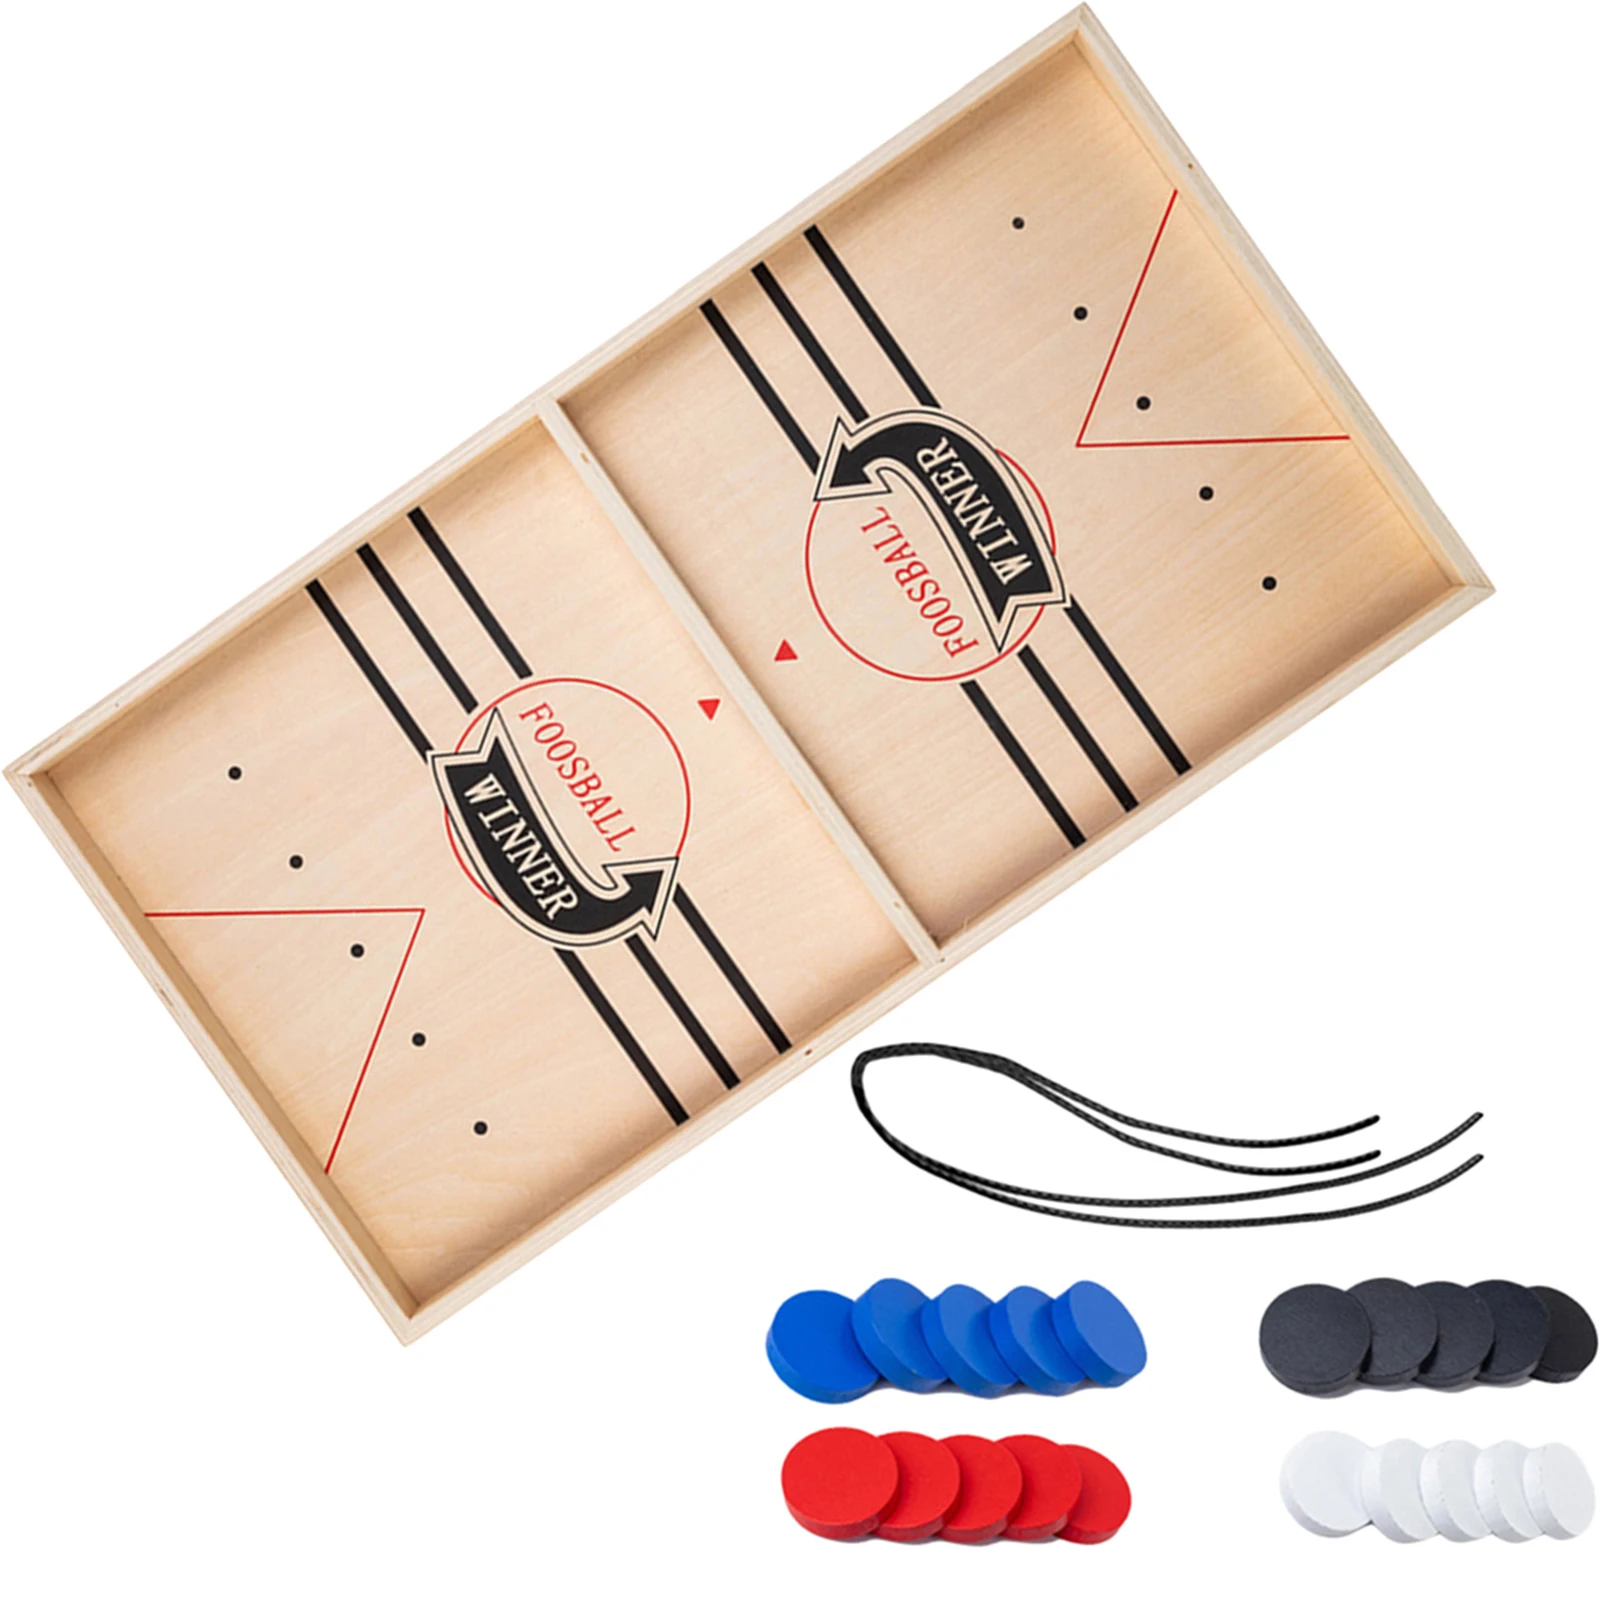 Slingshot Hockey Game Wooden Fast Slingpuck Board Game Desktop Battle Chess Toy Portable Paced Sling Puck Sports Toy For